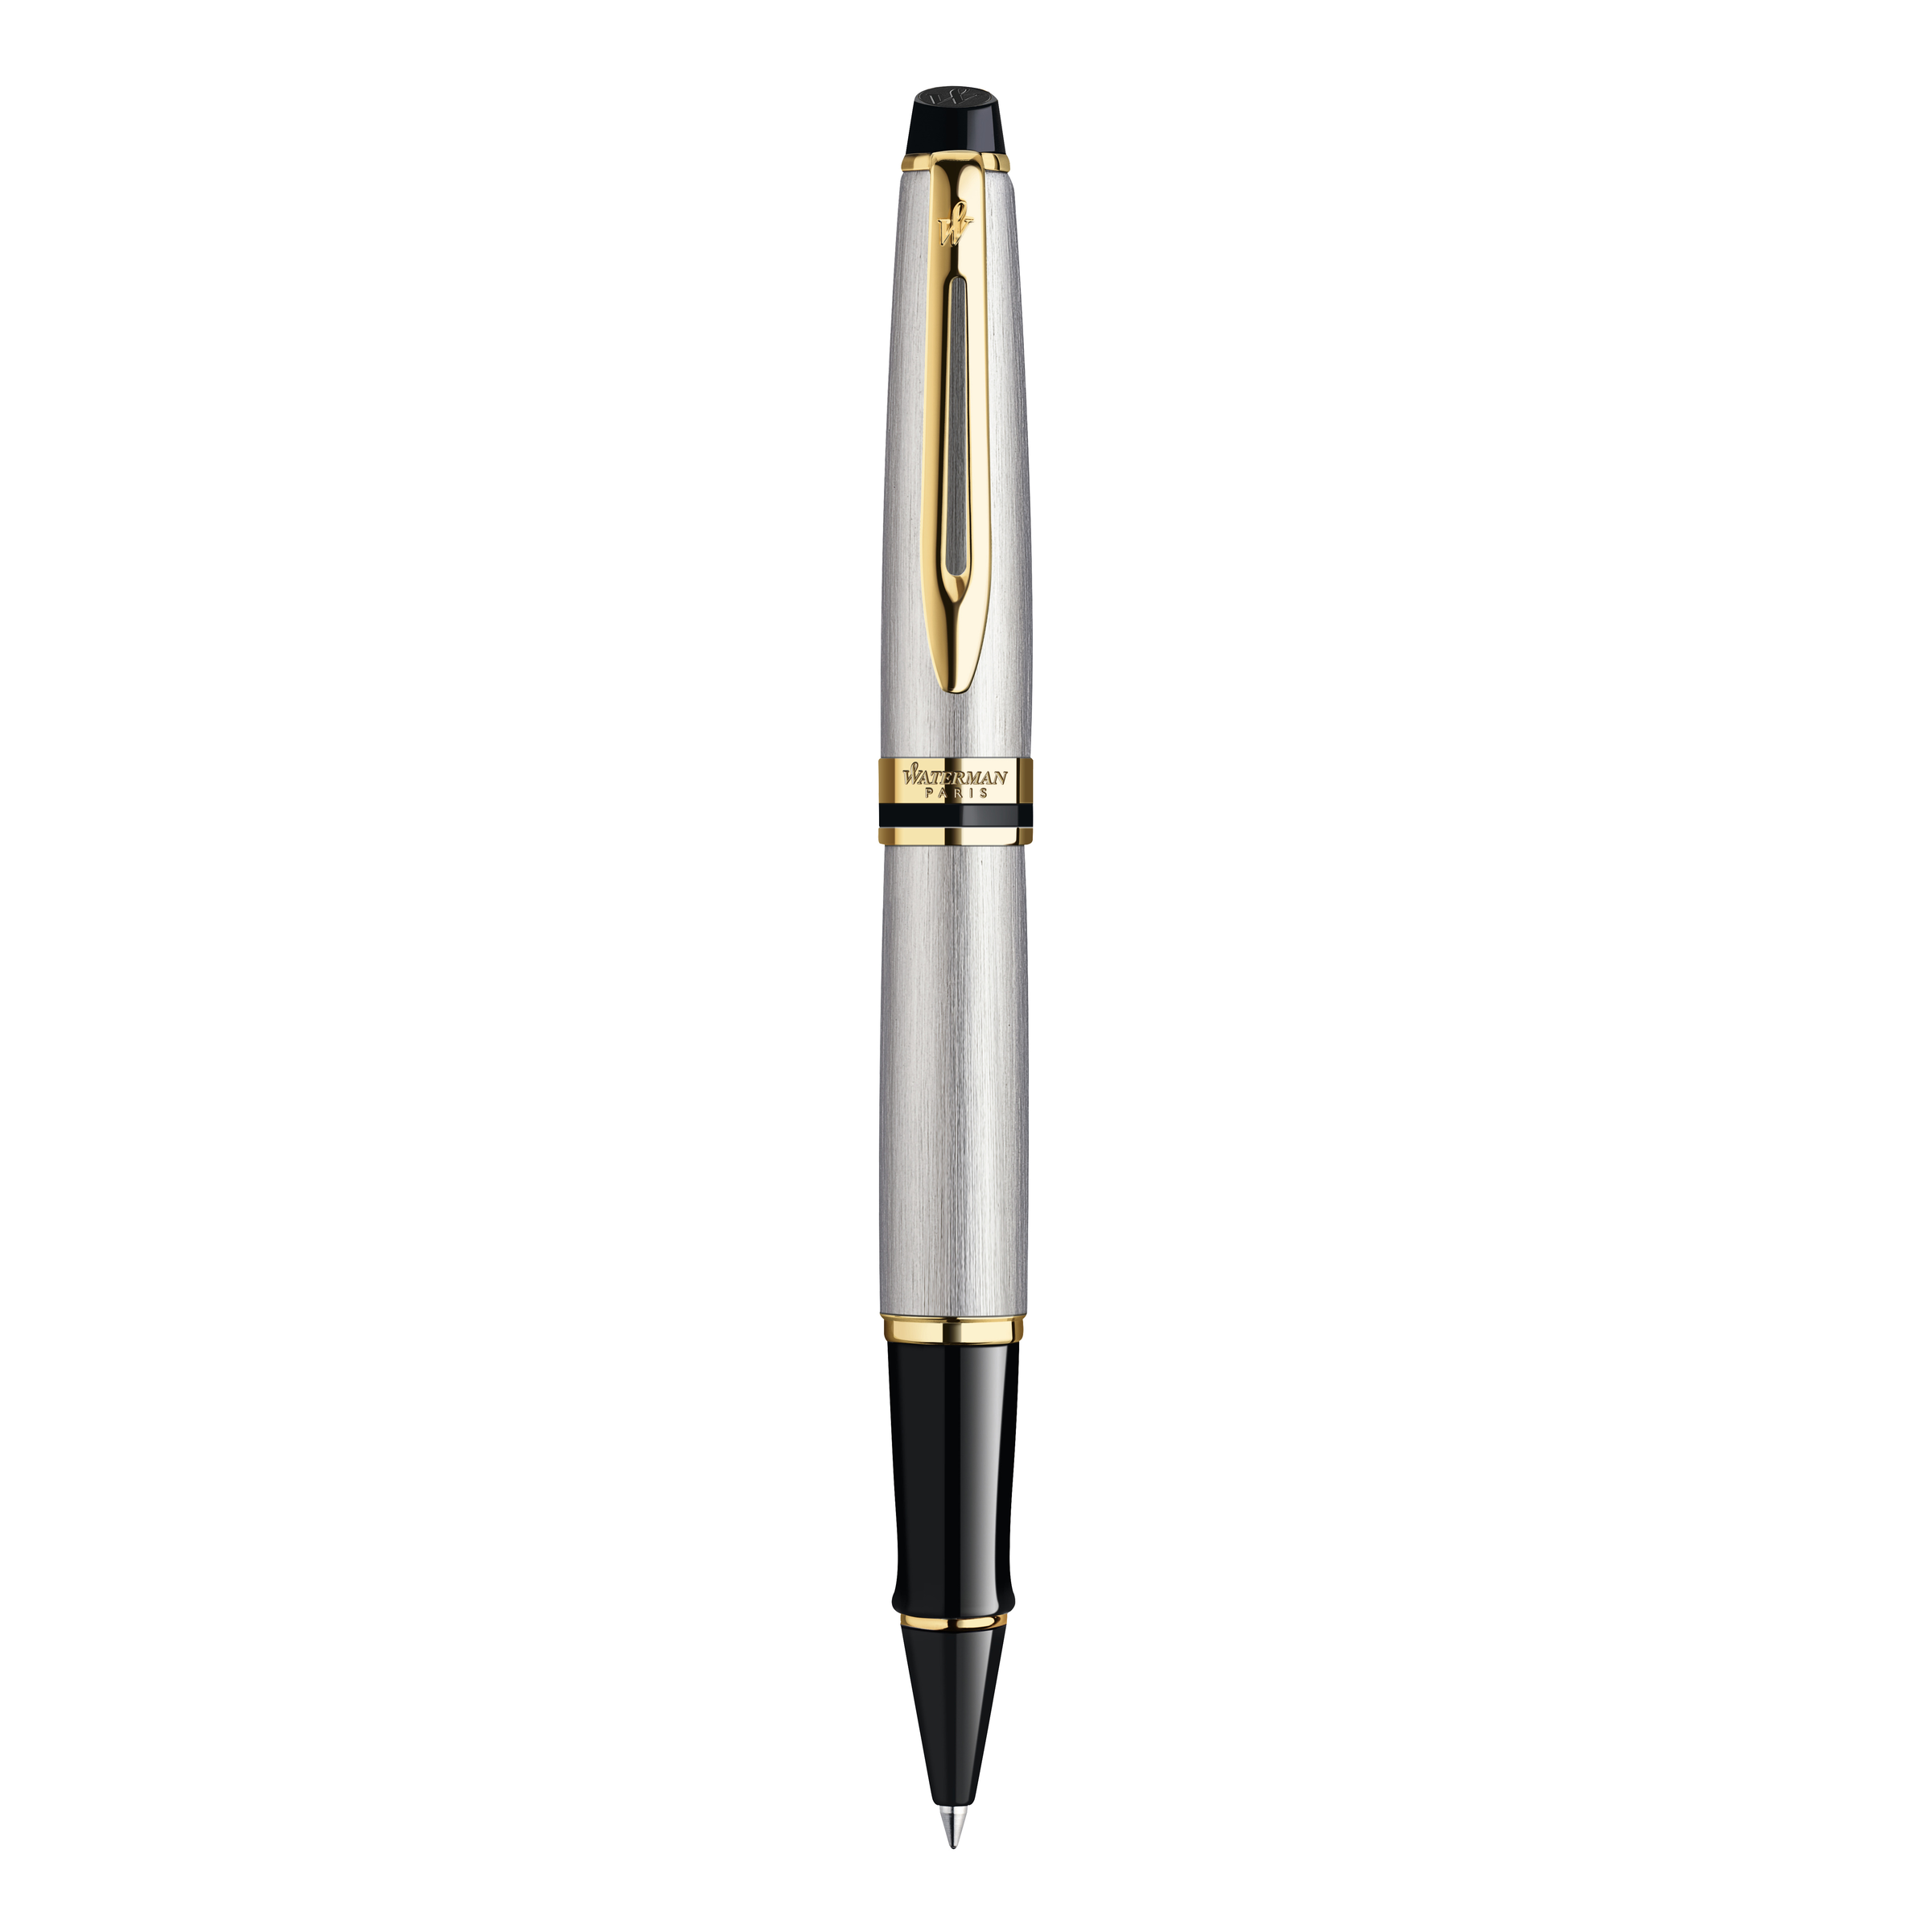 Waterman Expert Stainless Steel Gold Trim Rollerball - Pencraft the boutique